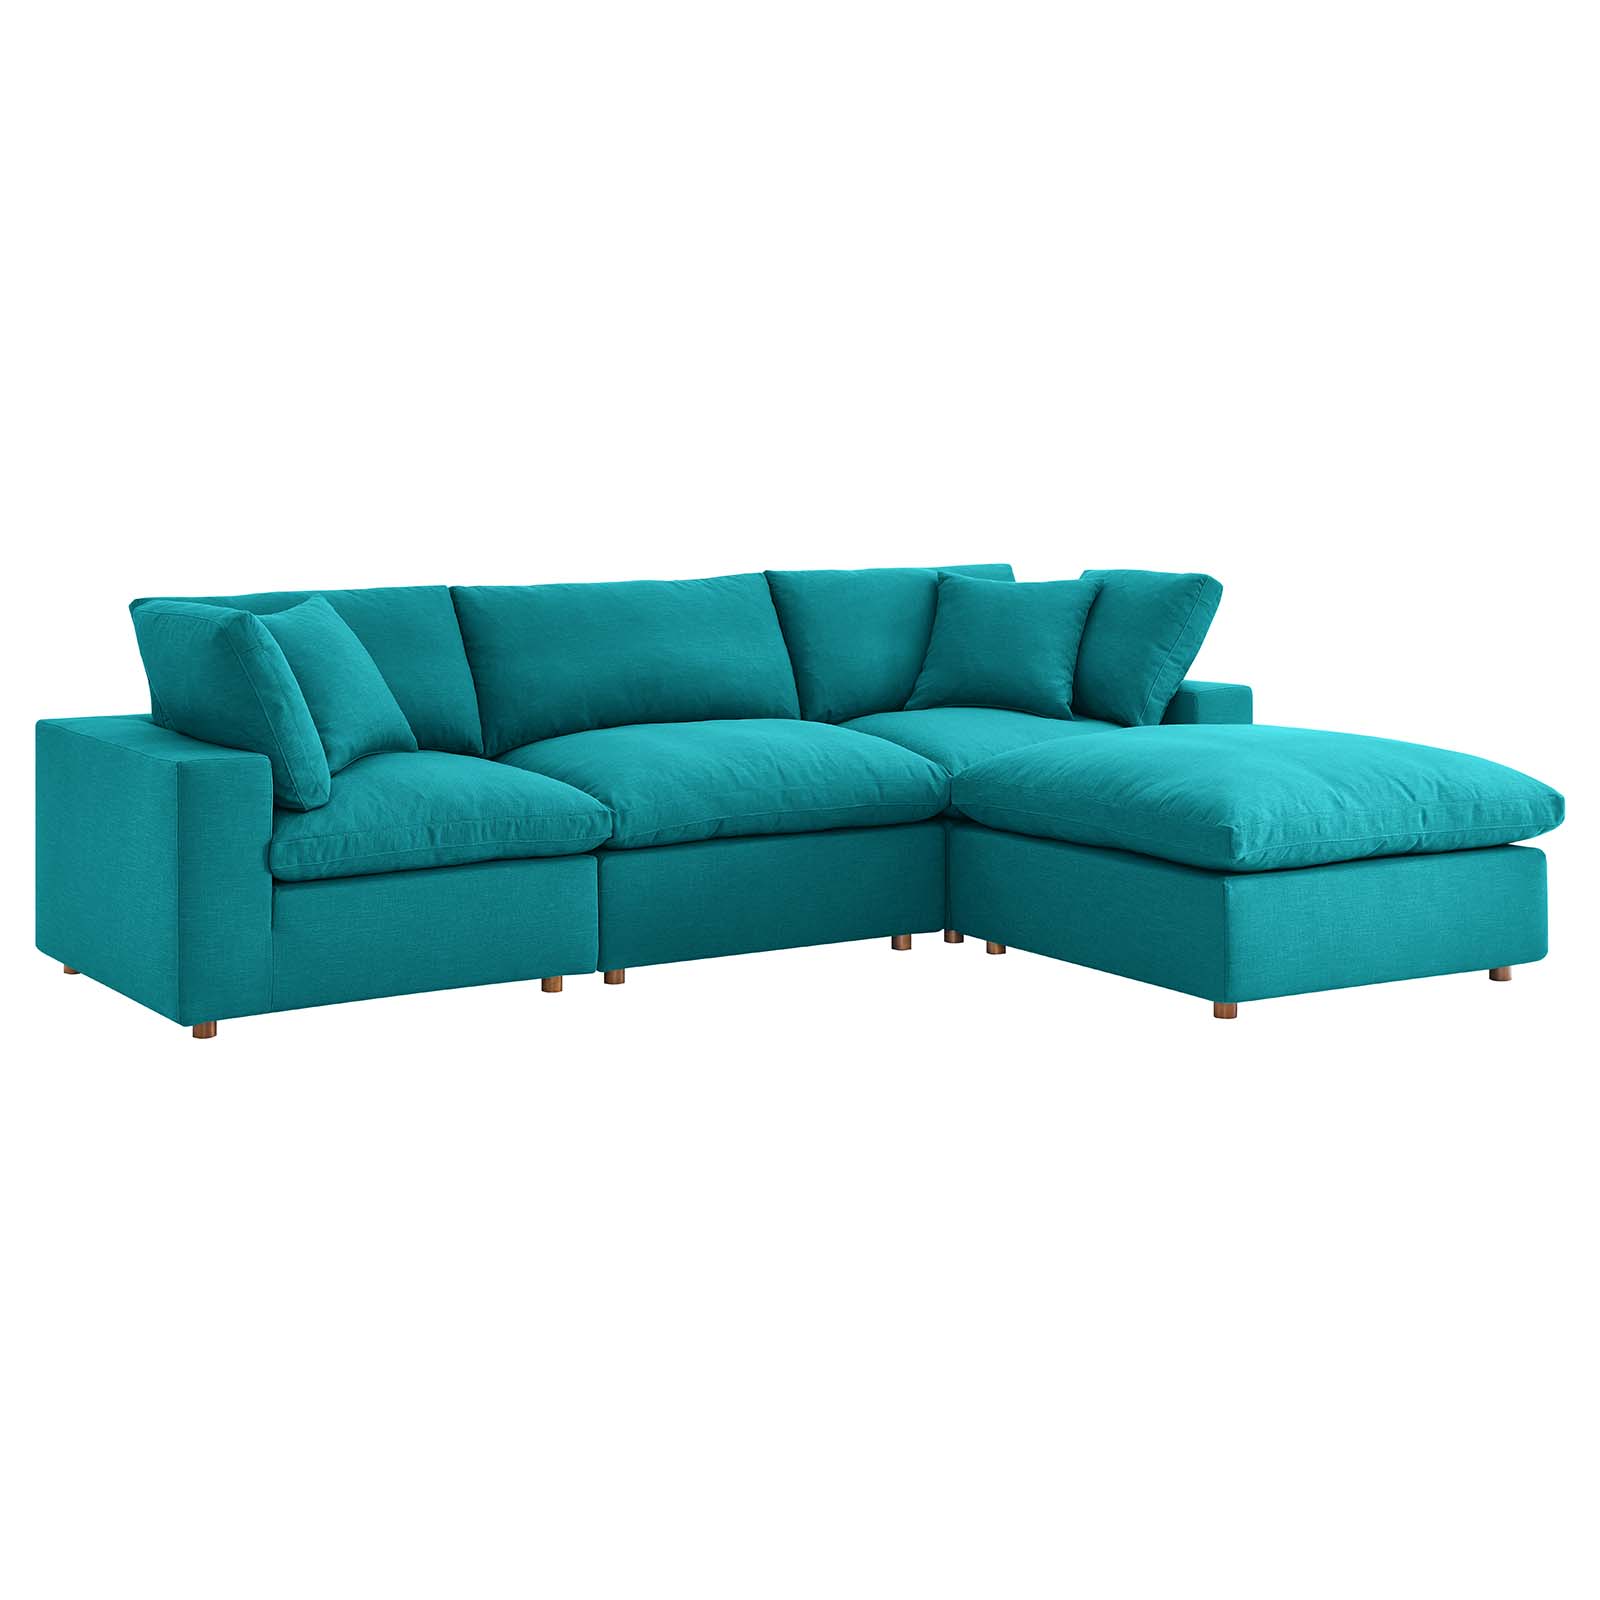 Modway Commix 4-Piece Fabric Down Filled Sectional Sofa Set in Teal - image 2 of 10